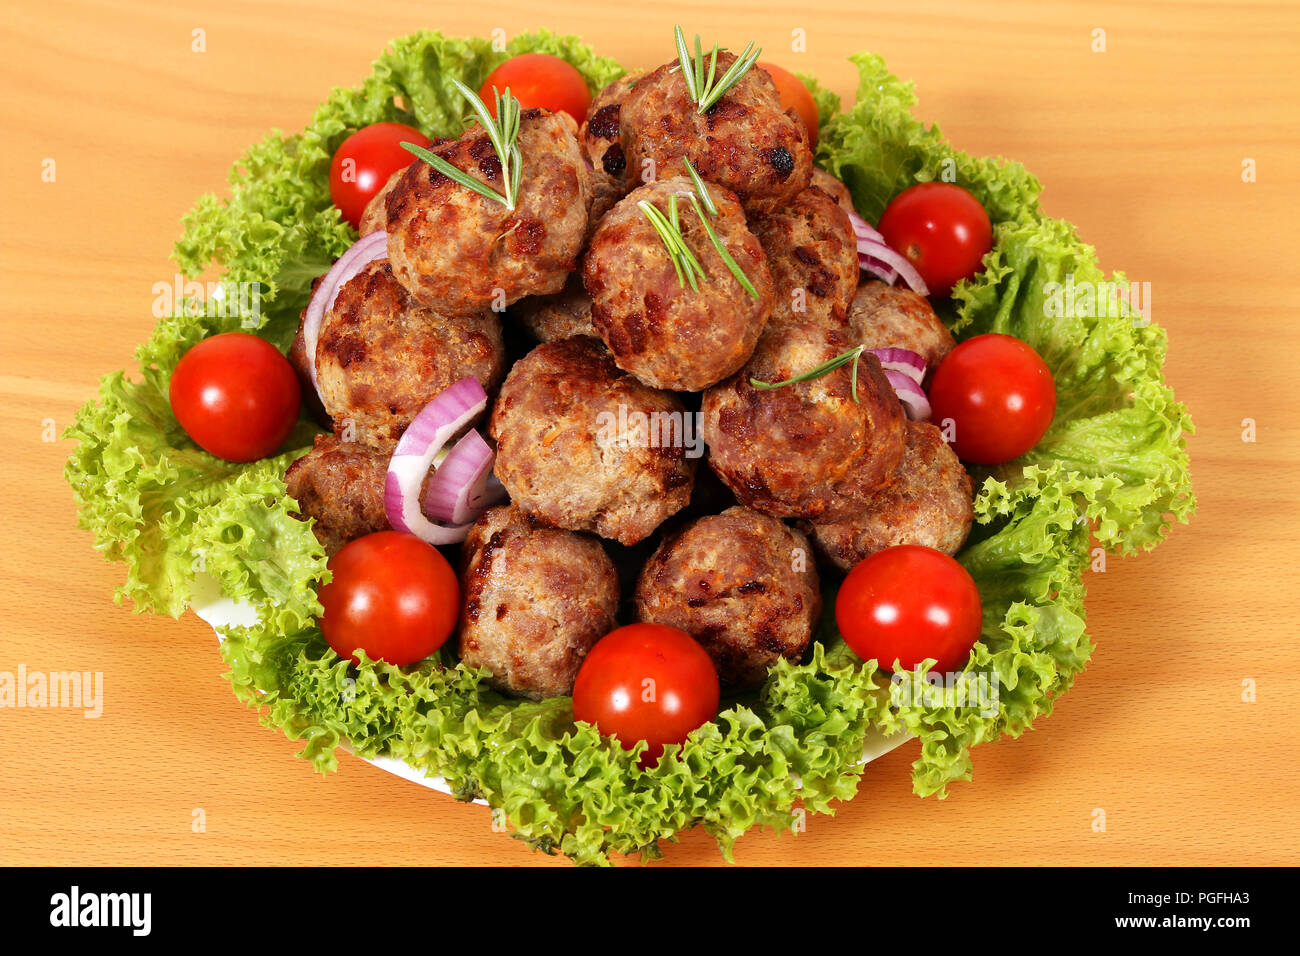 meatballs with tomatoes and salad on plate Stock Photo